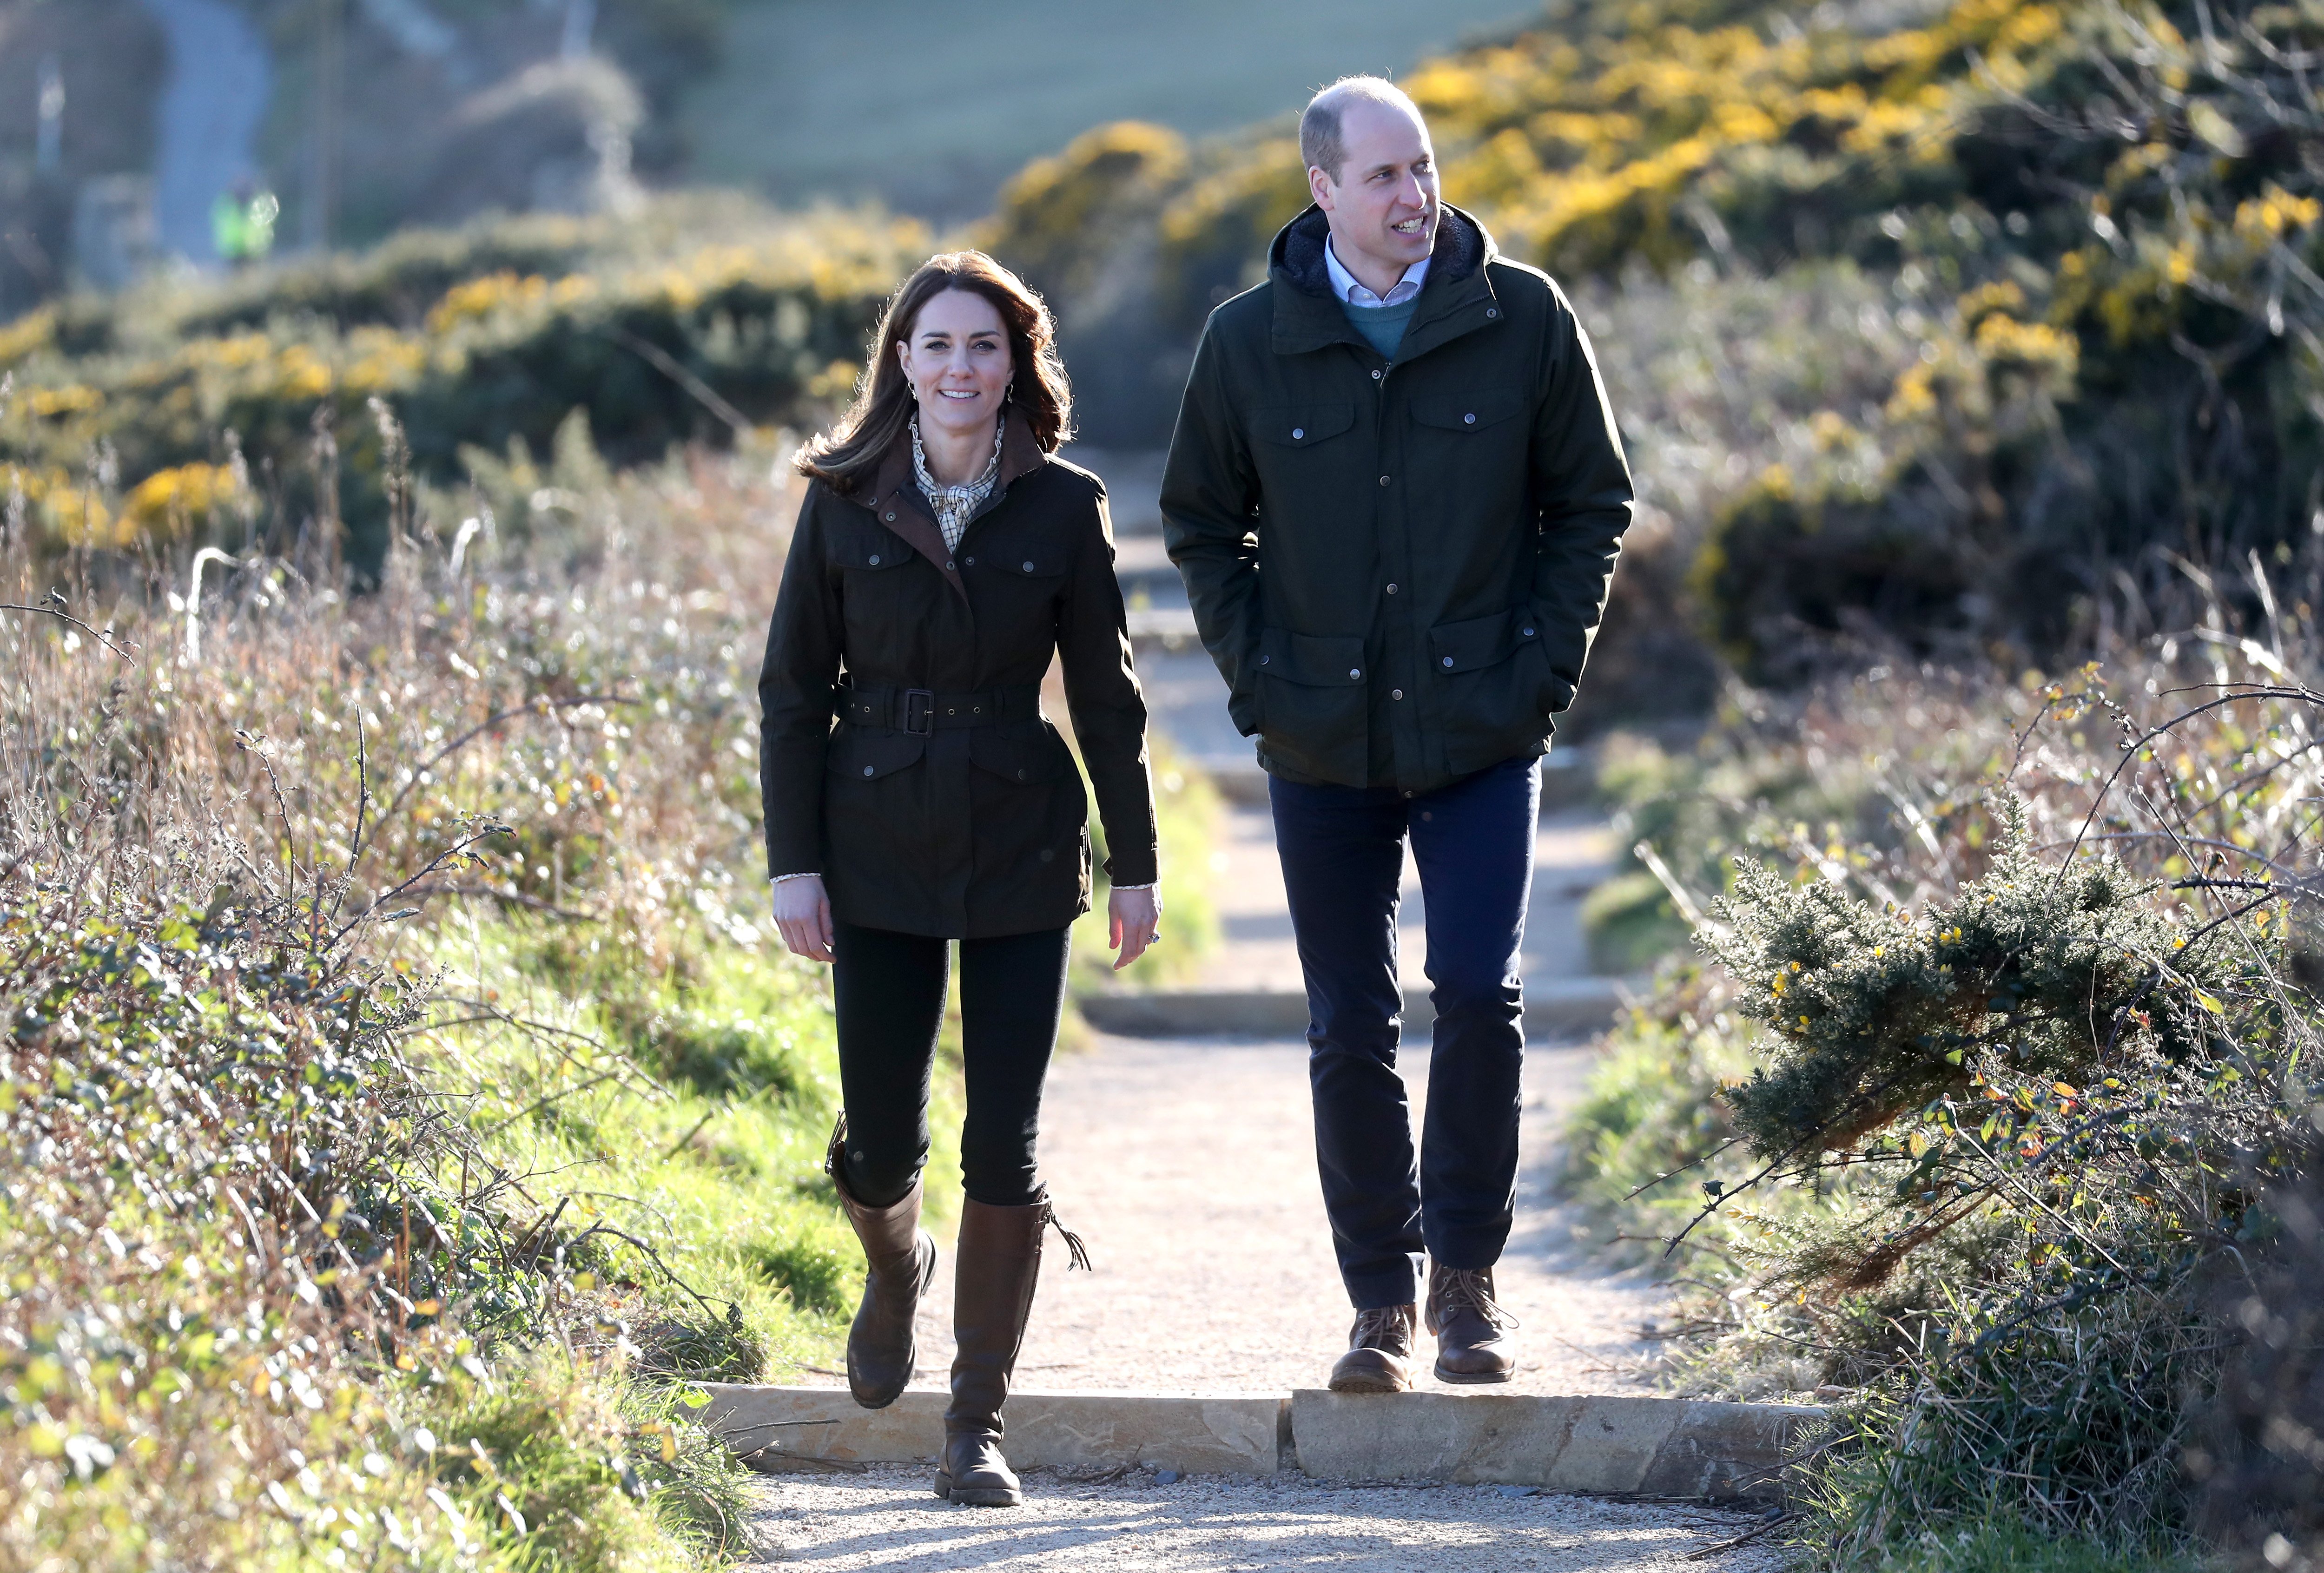 Kate Middleton and Prince William visit Howth Cliff, a cliff walk with views out over the Irish Sea during day two of their visit to Ireland on March 04, 2020 | Photo: Getty Images